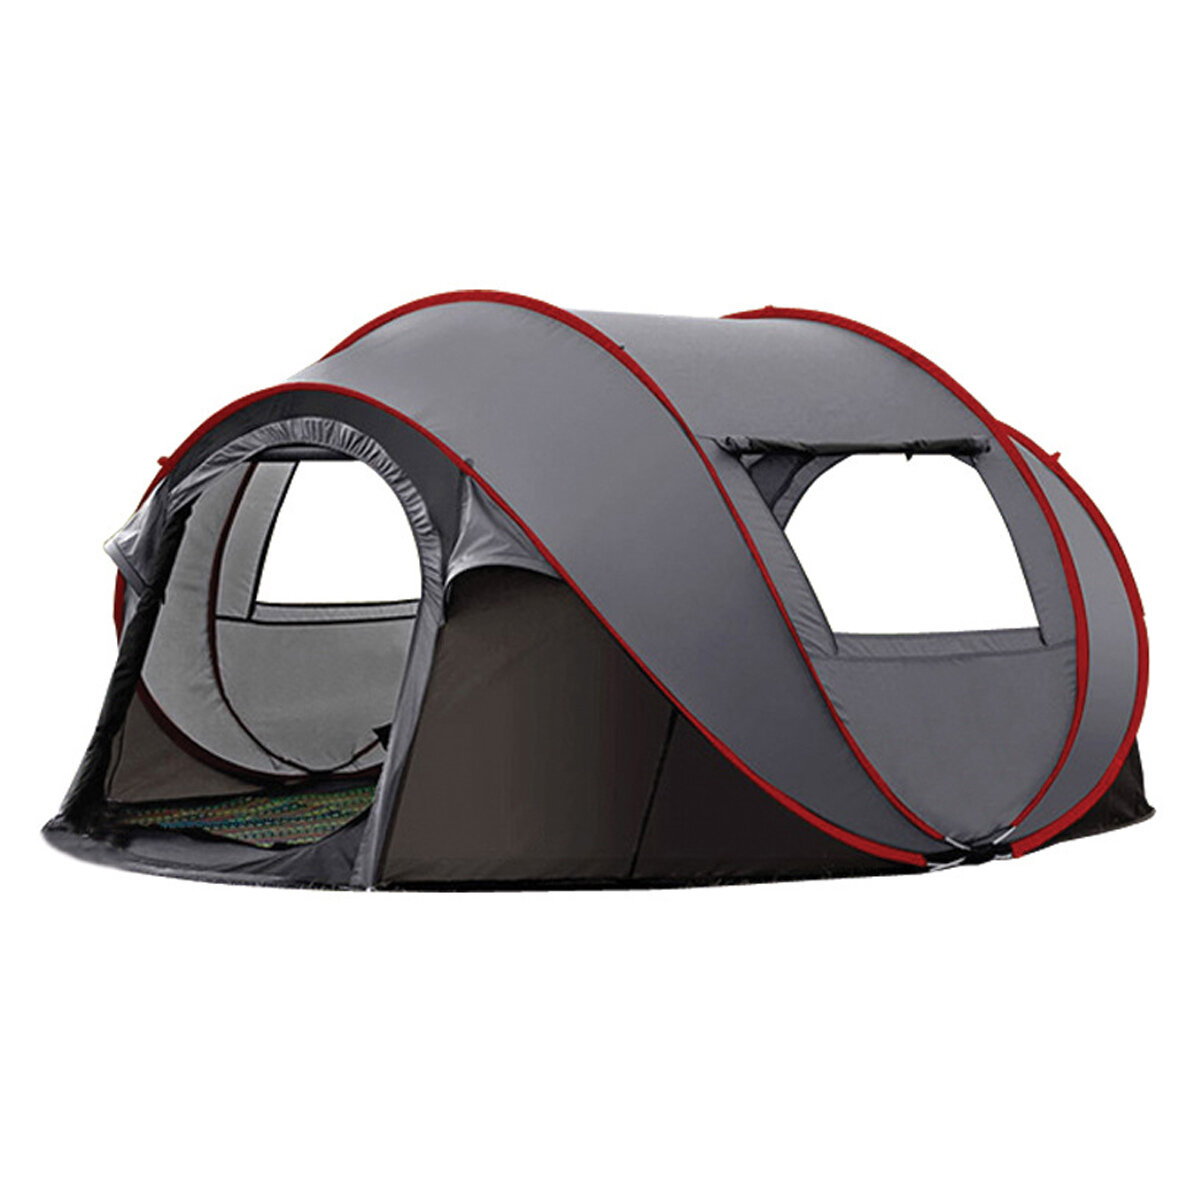 4-5 Person Camping Tent 210D Oxford Cloth Fully Automatic Speed Open Camping Tent